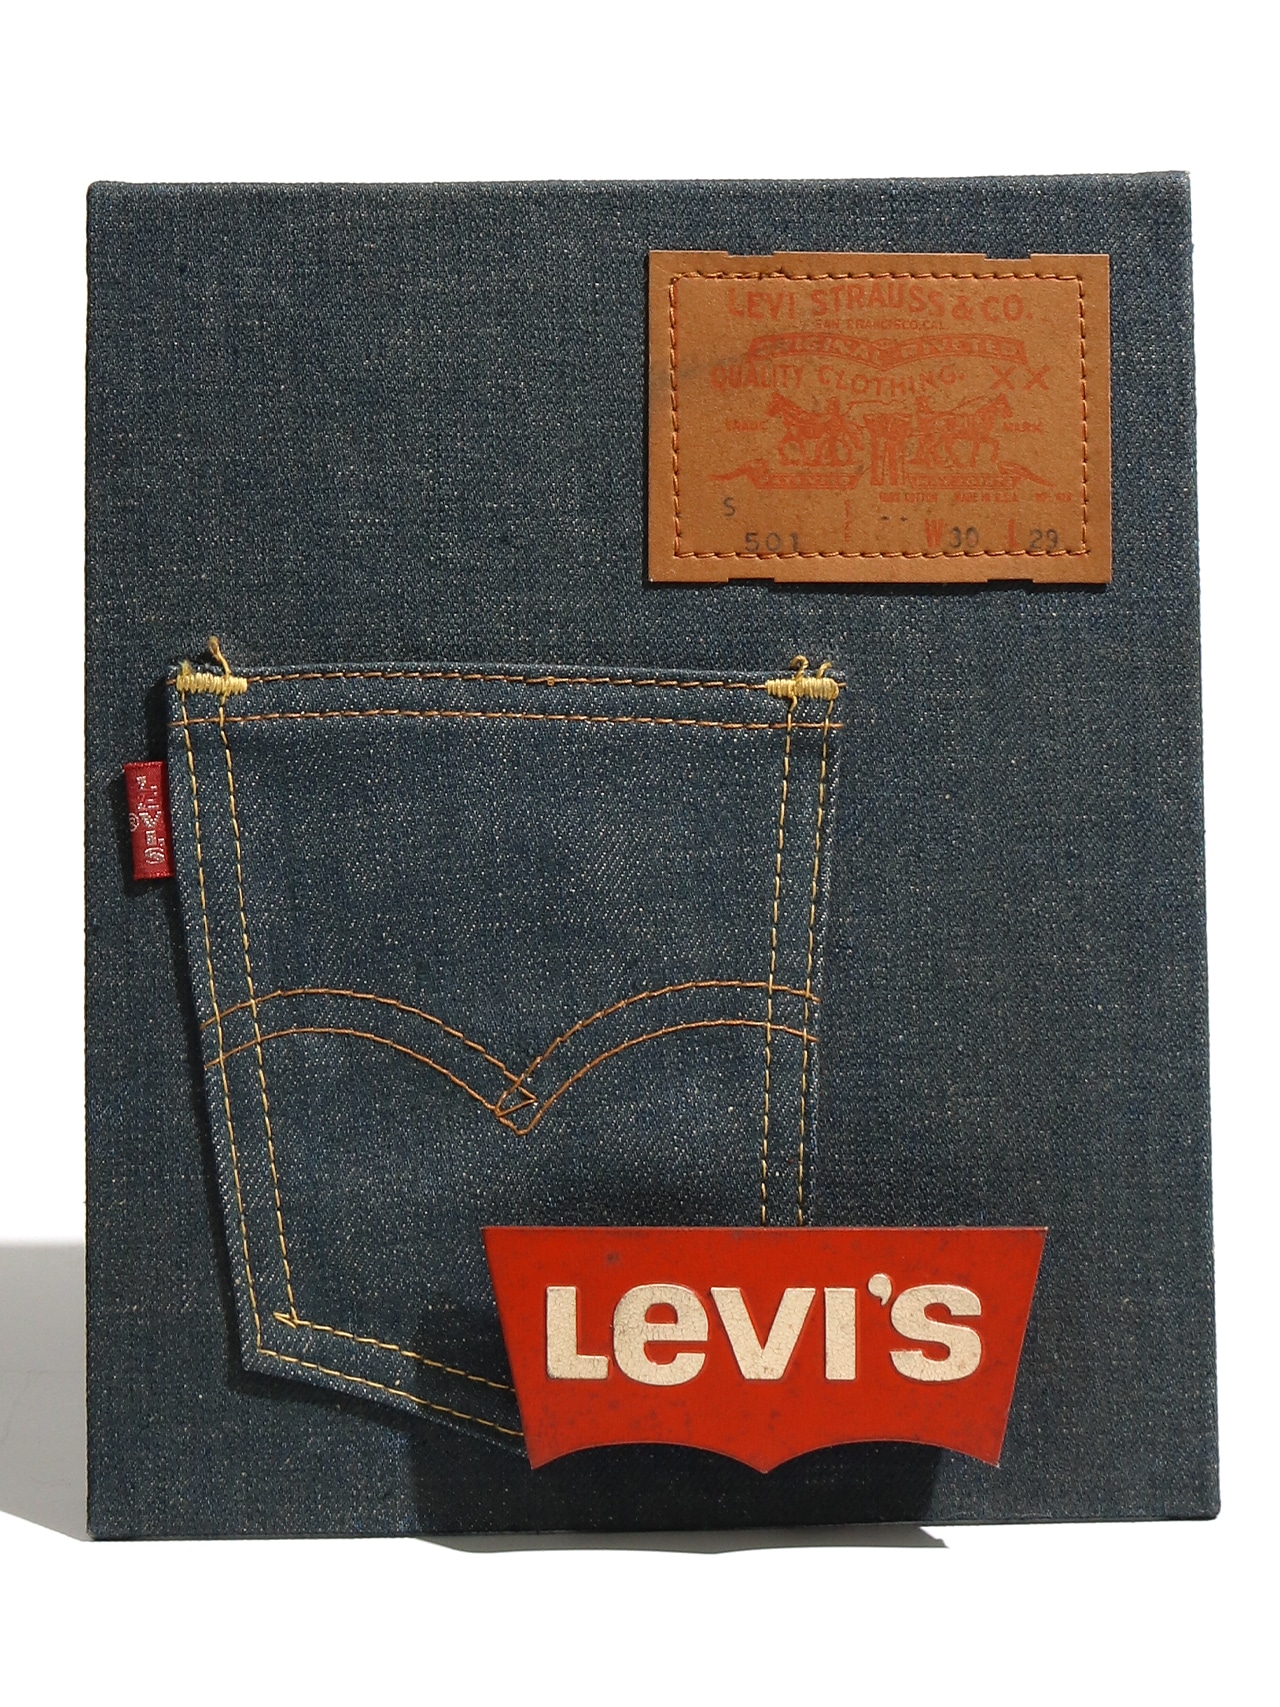 70's LEVI'S  Store Counter Display